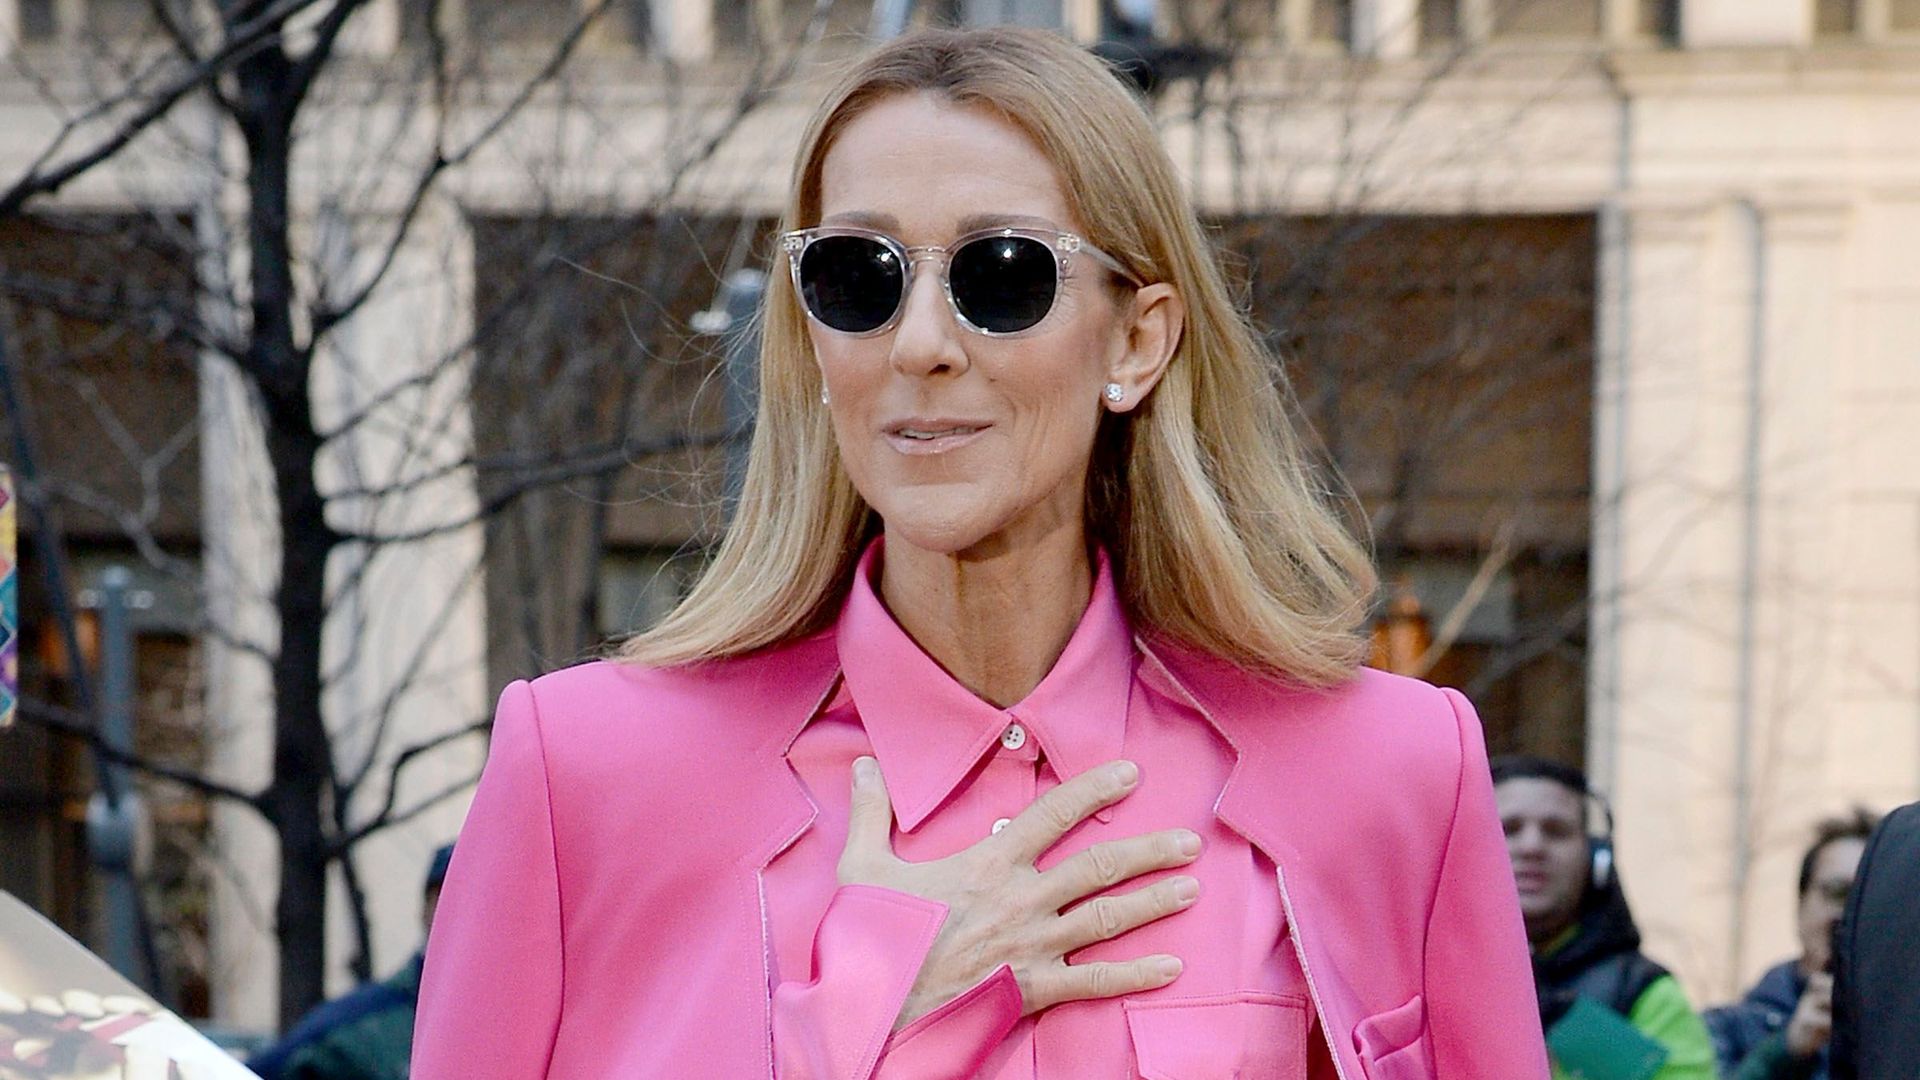 Celine Dion out and about in New York wearing pink